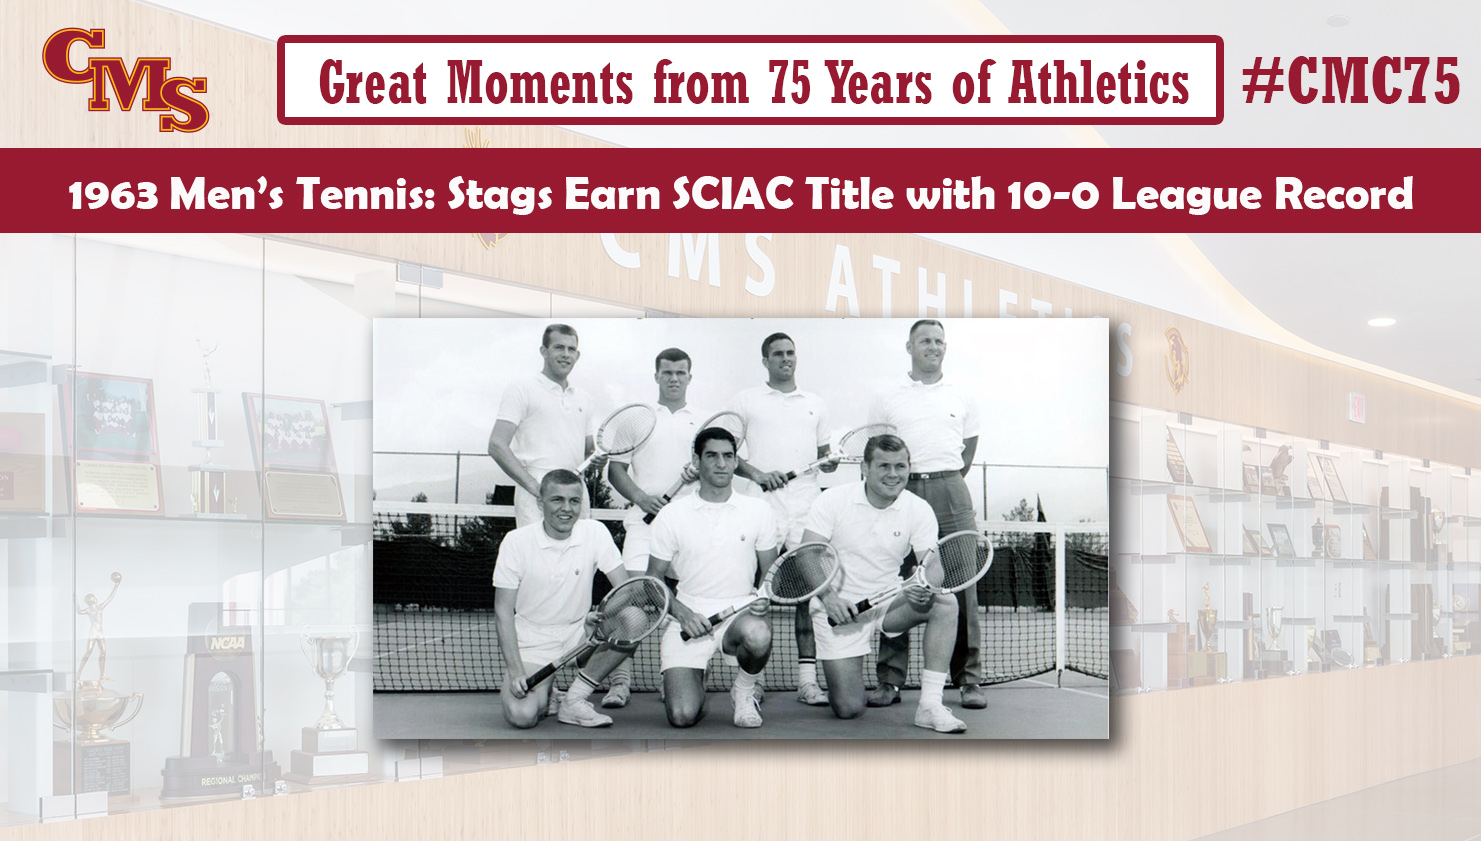 The 1963 Claremont-Mudd Men's Tennis team. Words over the photo read: 1963 Men's Tennis: Stags Earn SCIAC with 10-0 League Record.